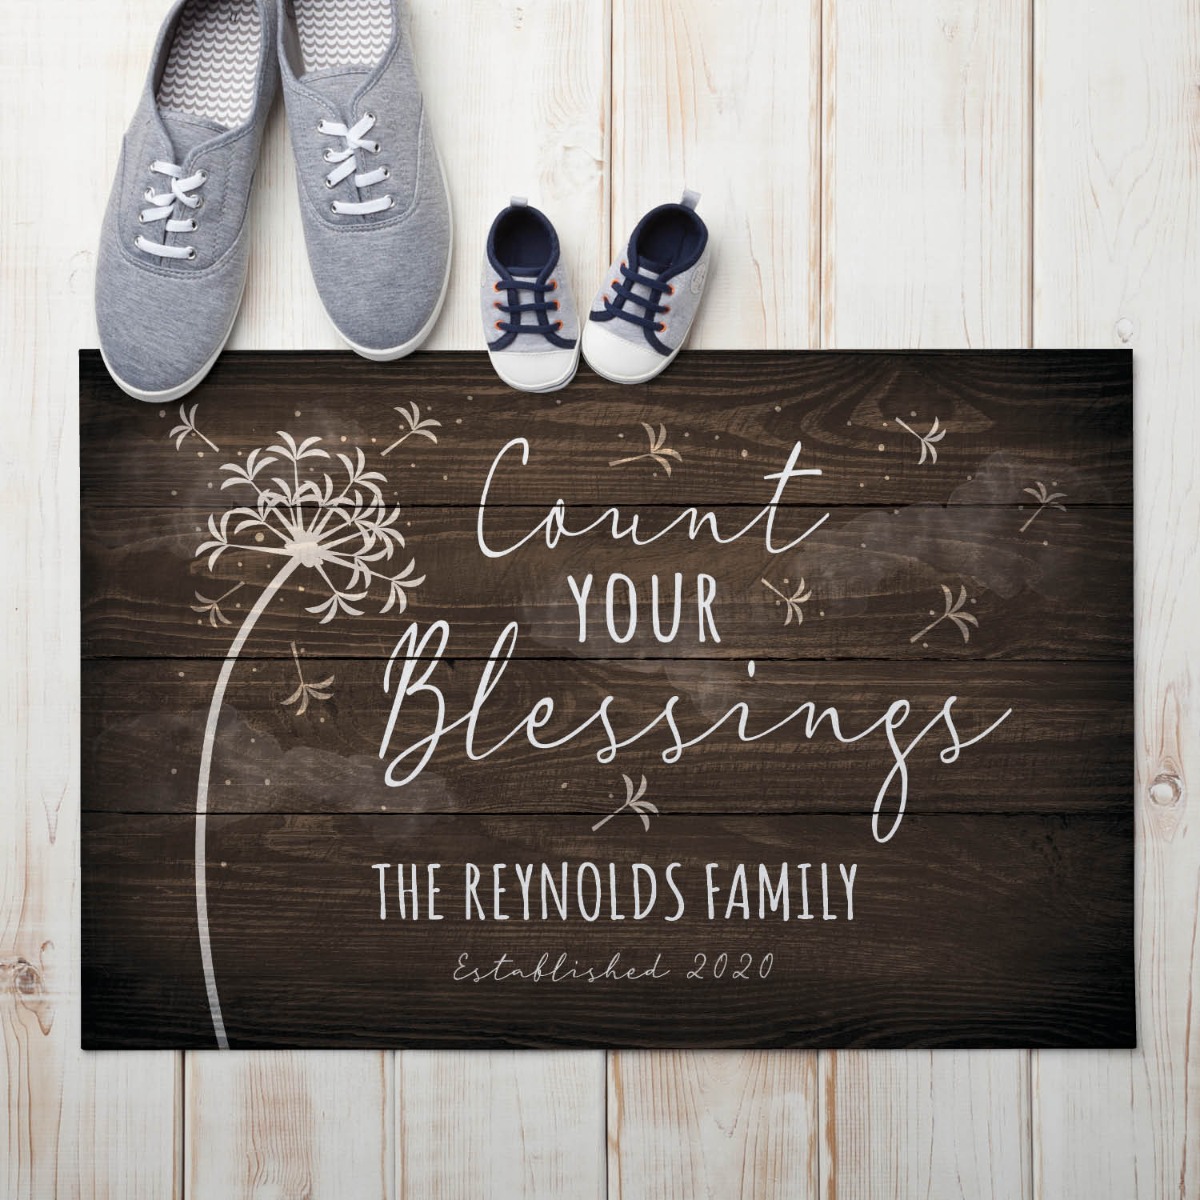 Count Your Blessings Personalized Standard Doormat